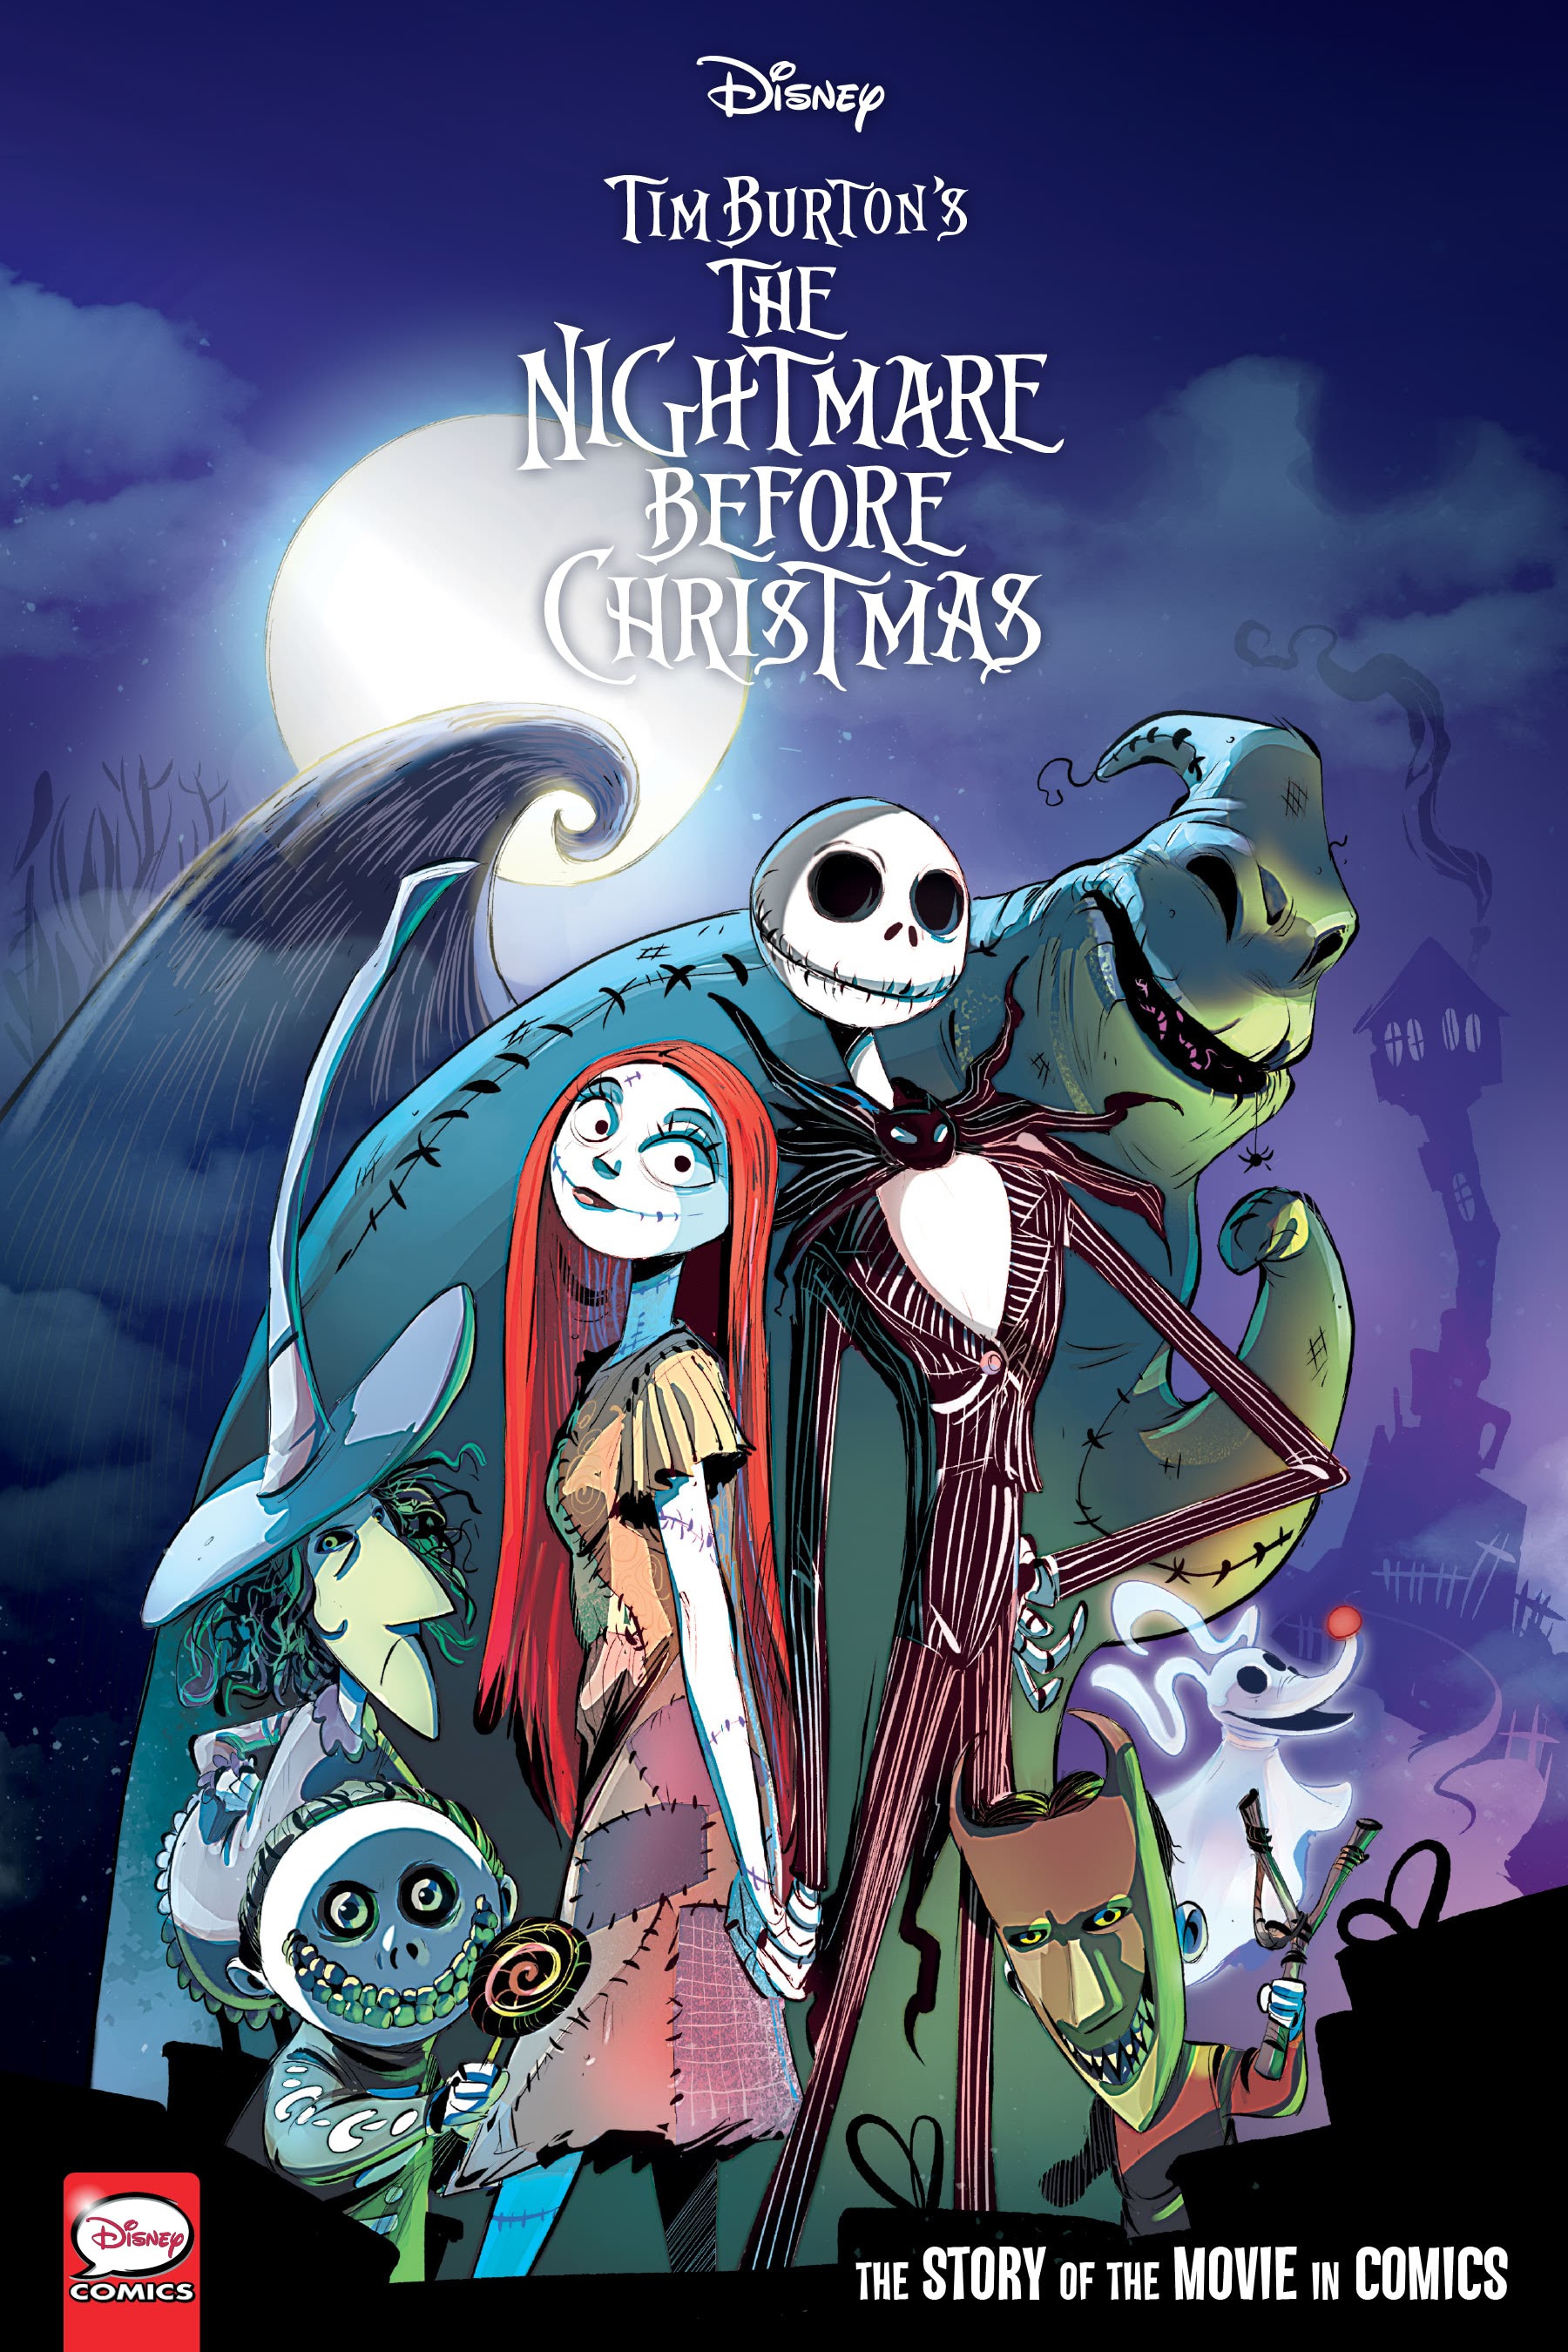 The Nightmare Before Christmas Cartoon Porn - Disney The Nightmare Before Christmas The Story Of The Movie In Comics Full  | Read Disney The Nightmare Before Christmas The Story Of The Movie In  Comics Full comic online in high